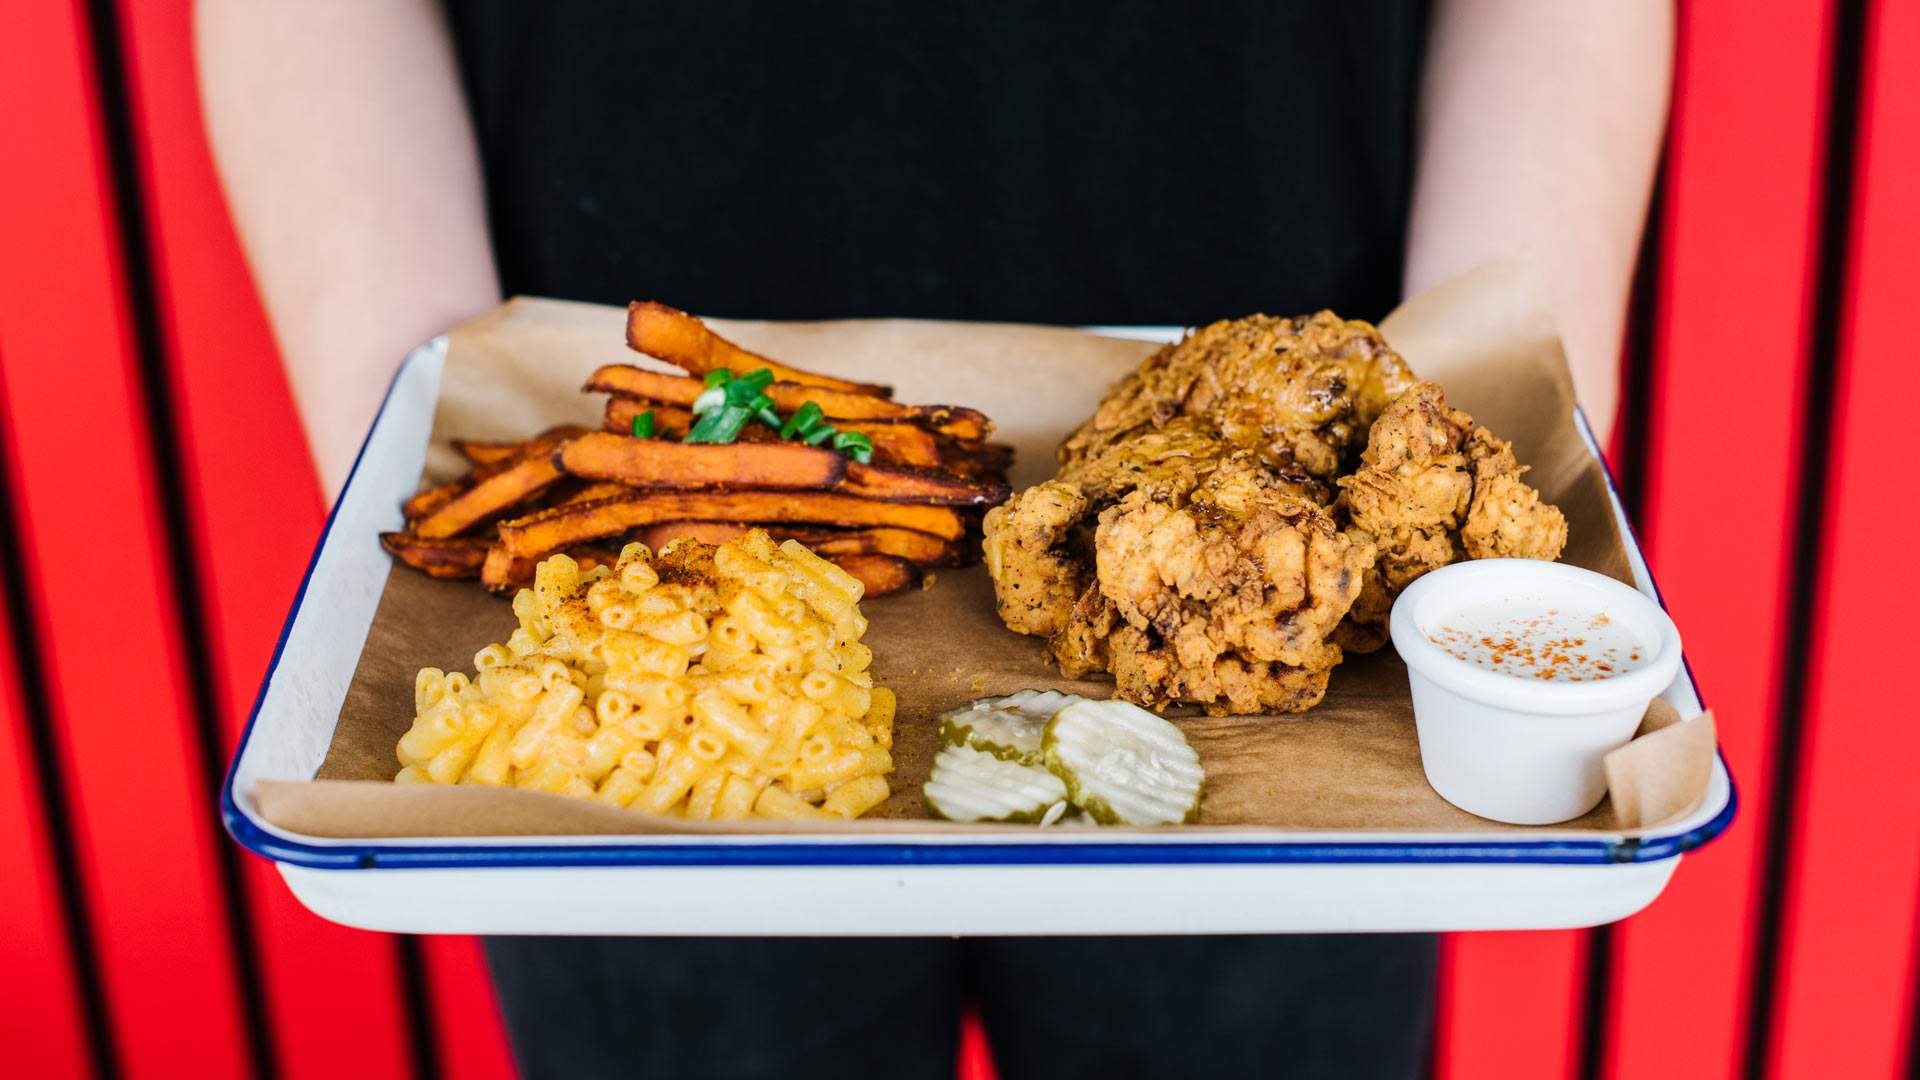 All-You-Can-Eat Fried Chicken 2019